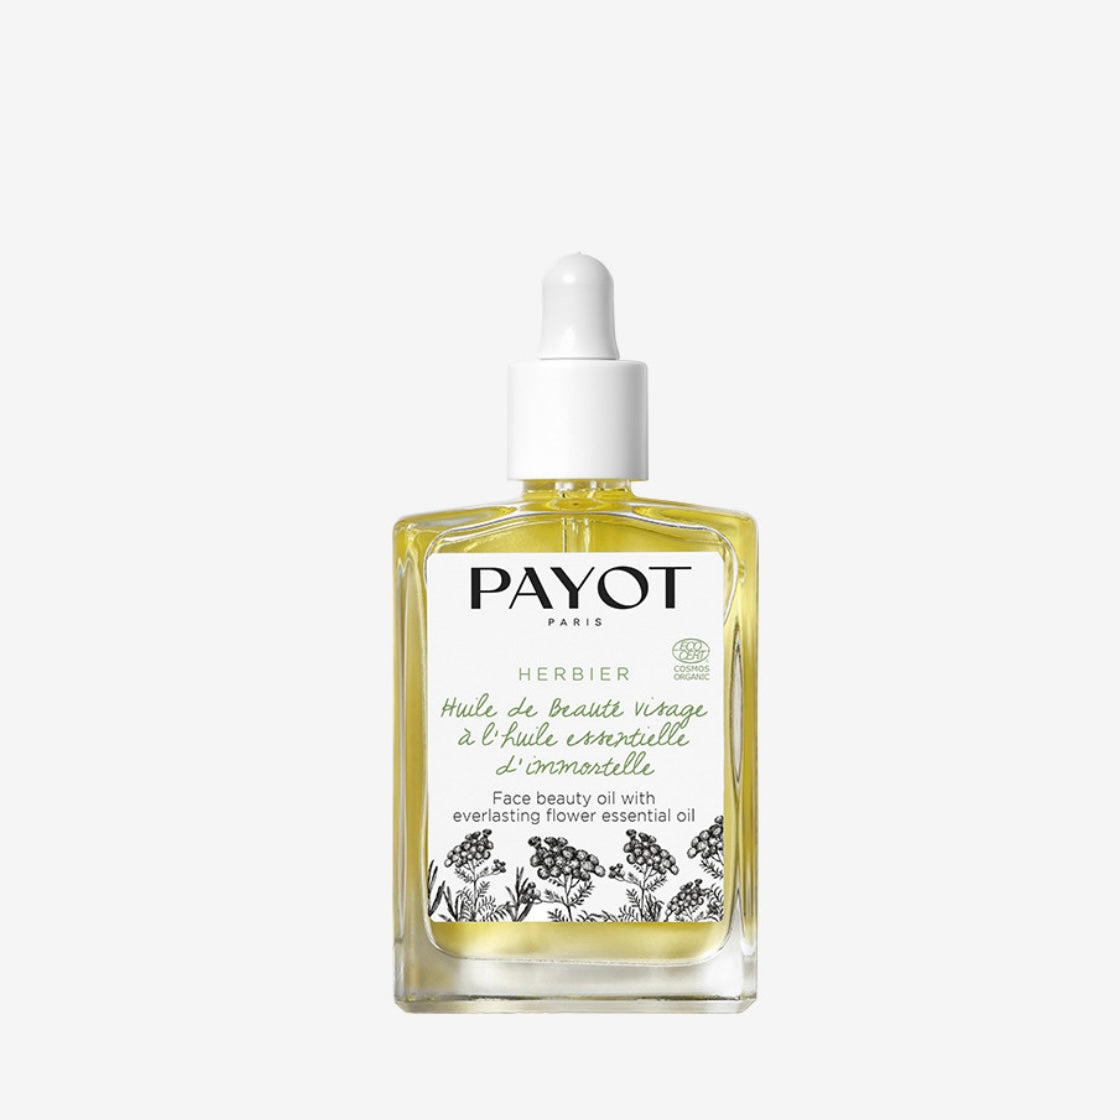 Herbier Face Beauty Oil | Payot